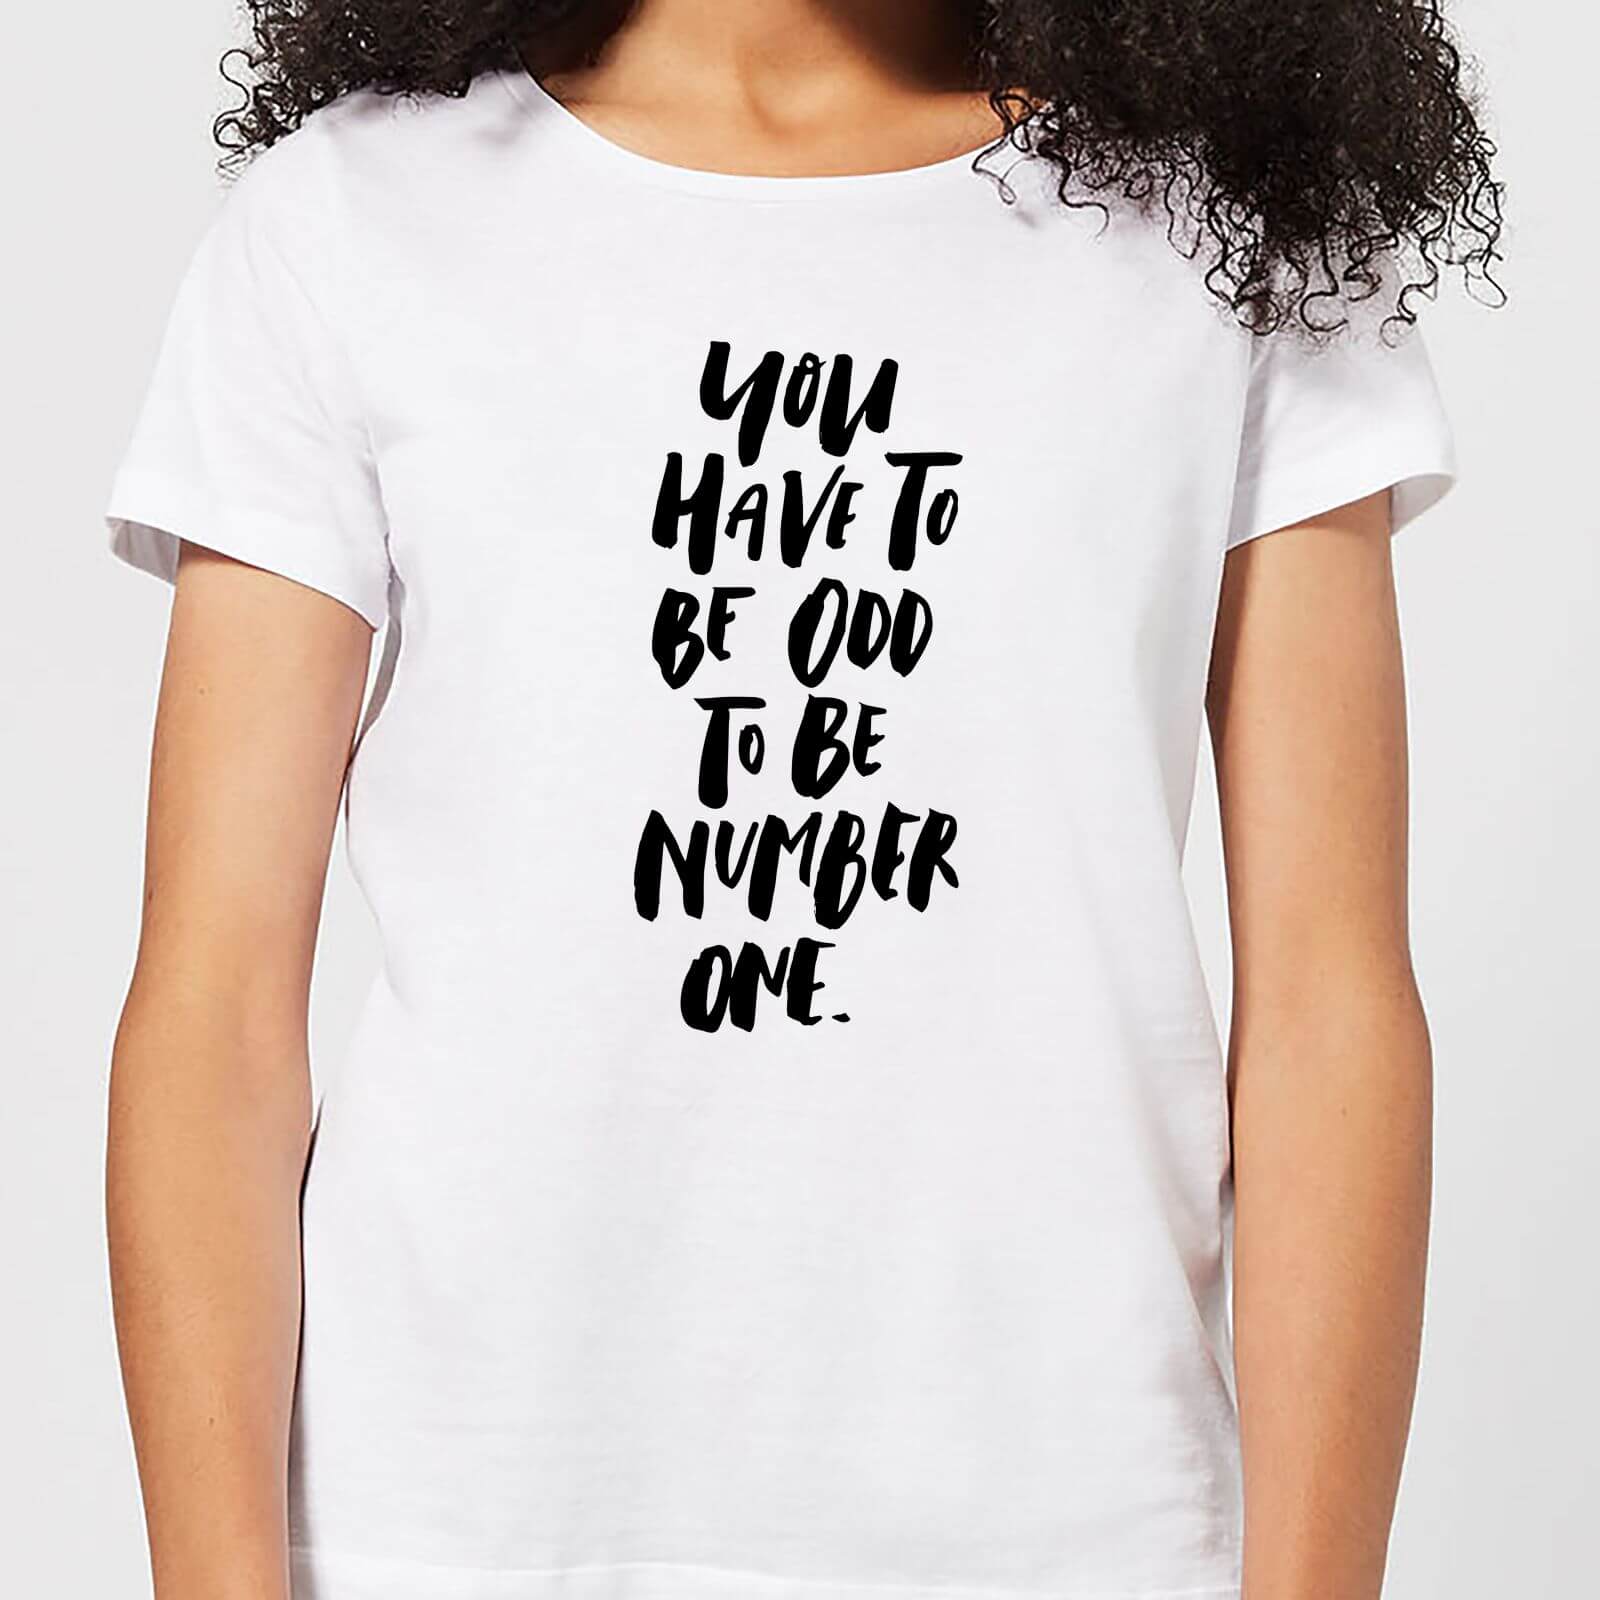 You Have To Be Odd To Be Number One Women's T-Shirt - White - L - White